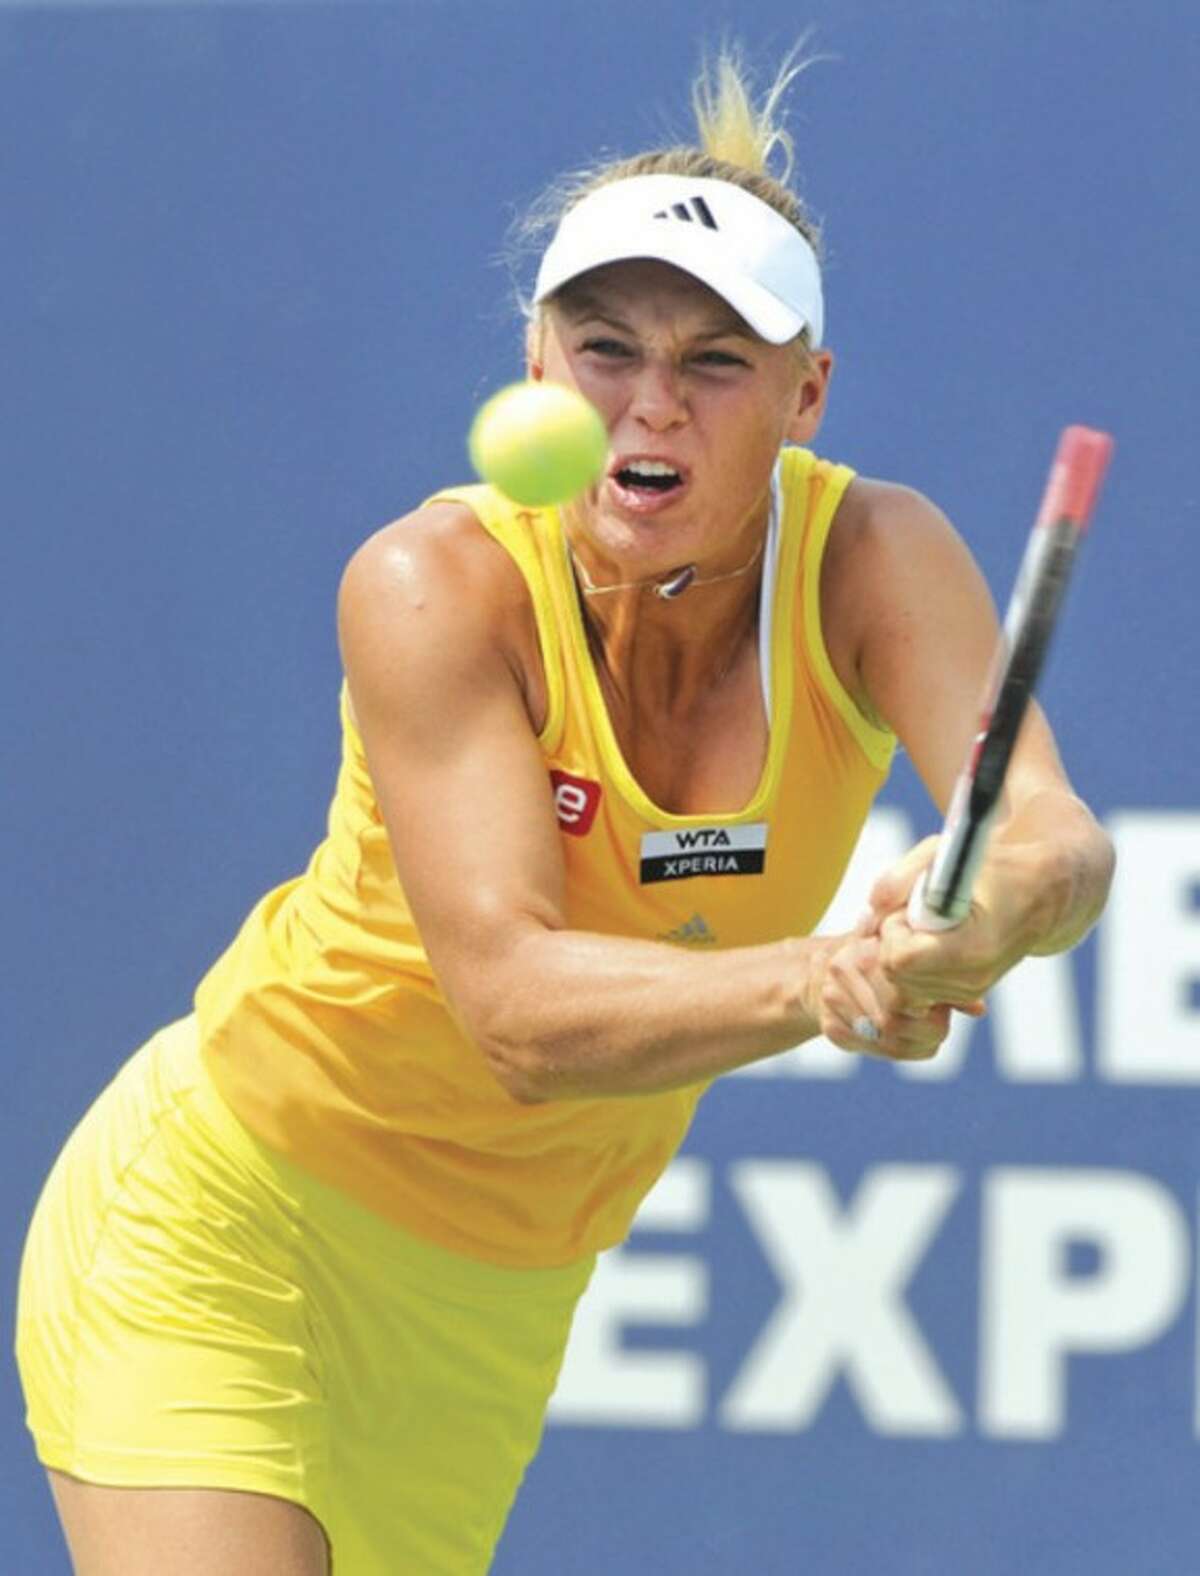 AP photo Caroline Wozniacki hits a backhand during her semifinal match against Maria Kirilenko Friday at the New Haven Open. The four-time defending champ, Wozniacki retired due to a knee injury after dropping the first set to Maria Kirilenko.